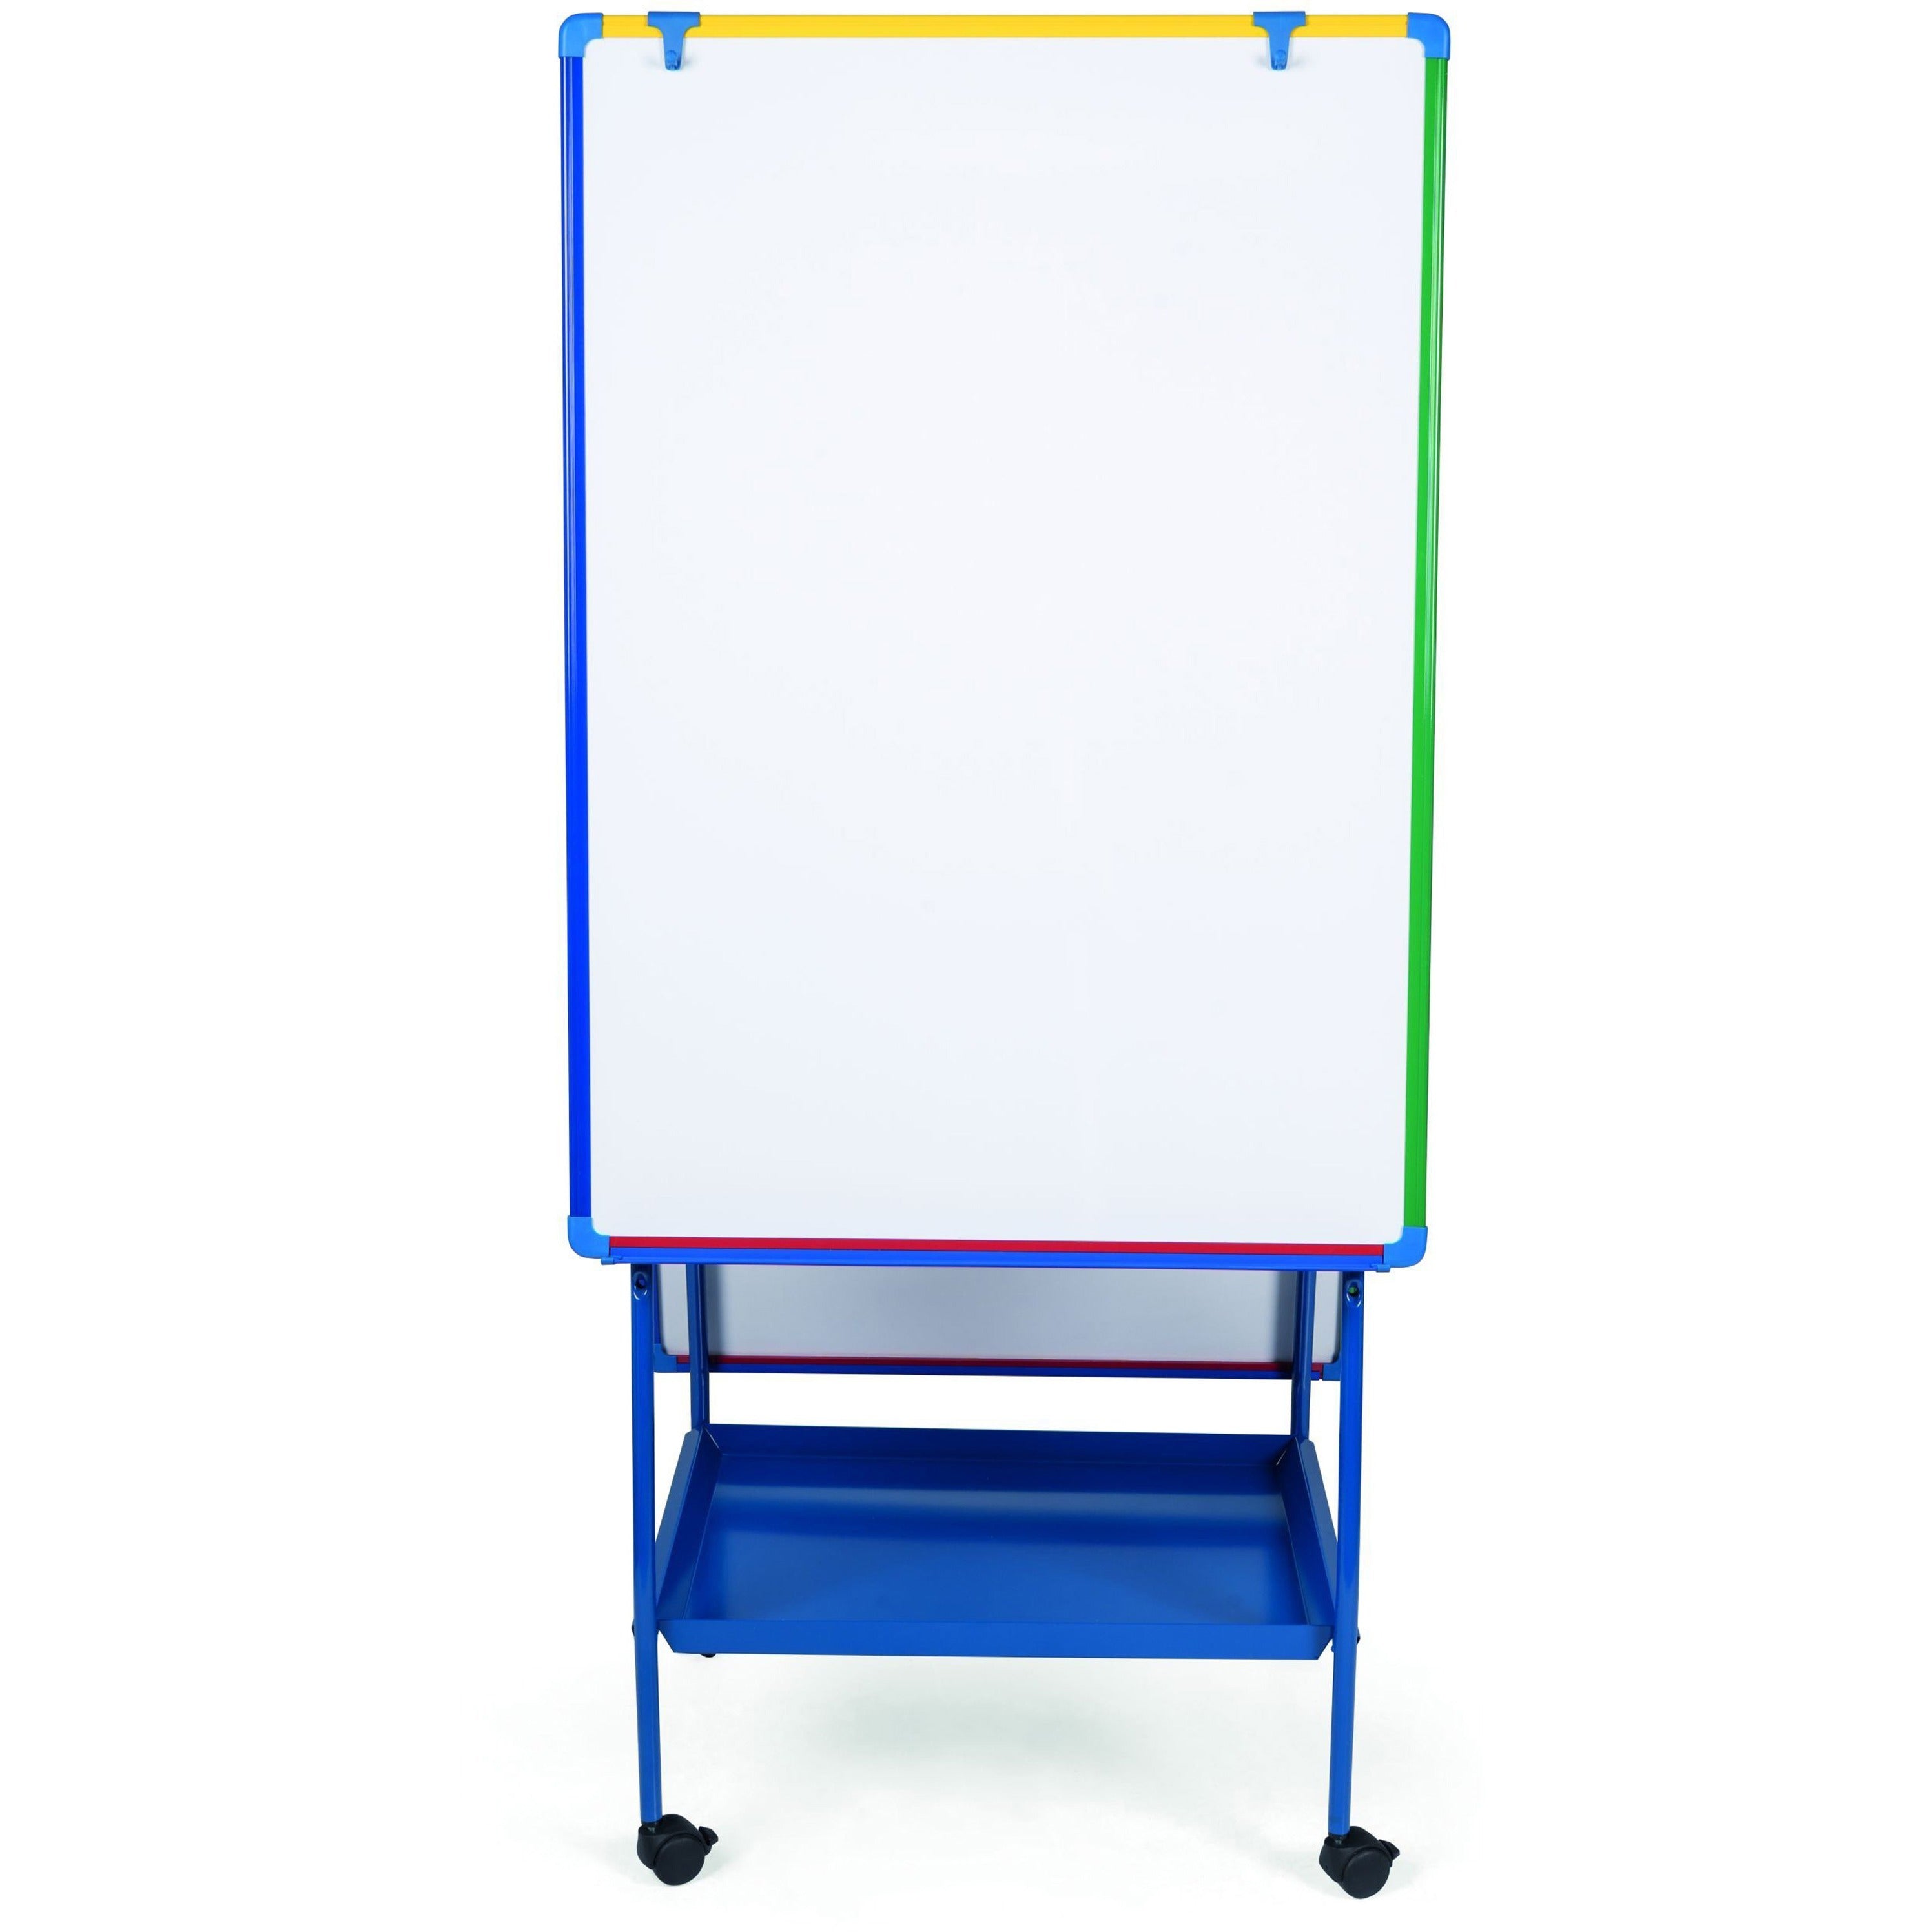 bi-office-magnetic-adjustabledoublee-sided-easel-white-surface-rectangle-magnetic-assembly-required-1-each_bvcea49145026 - 3